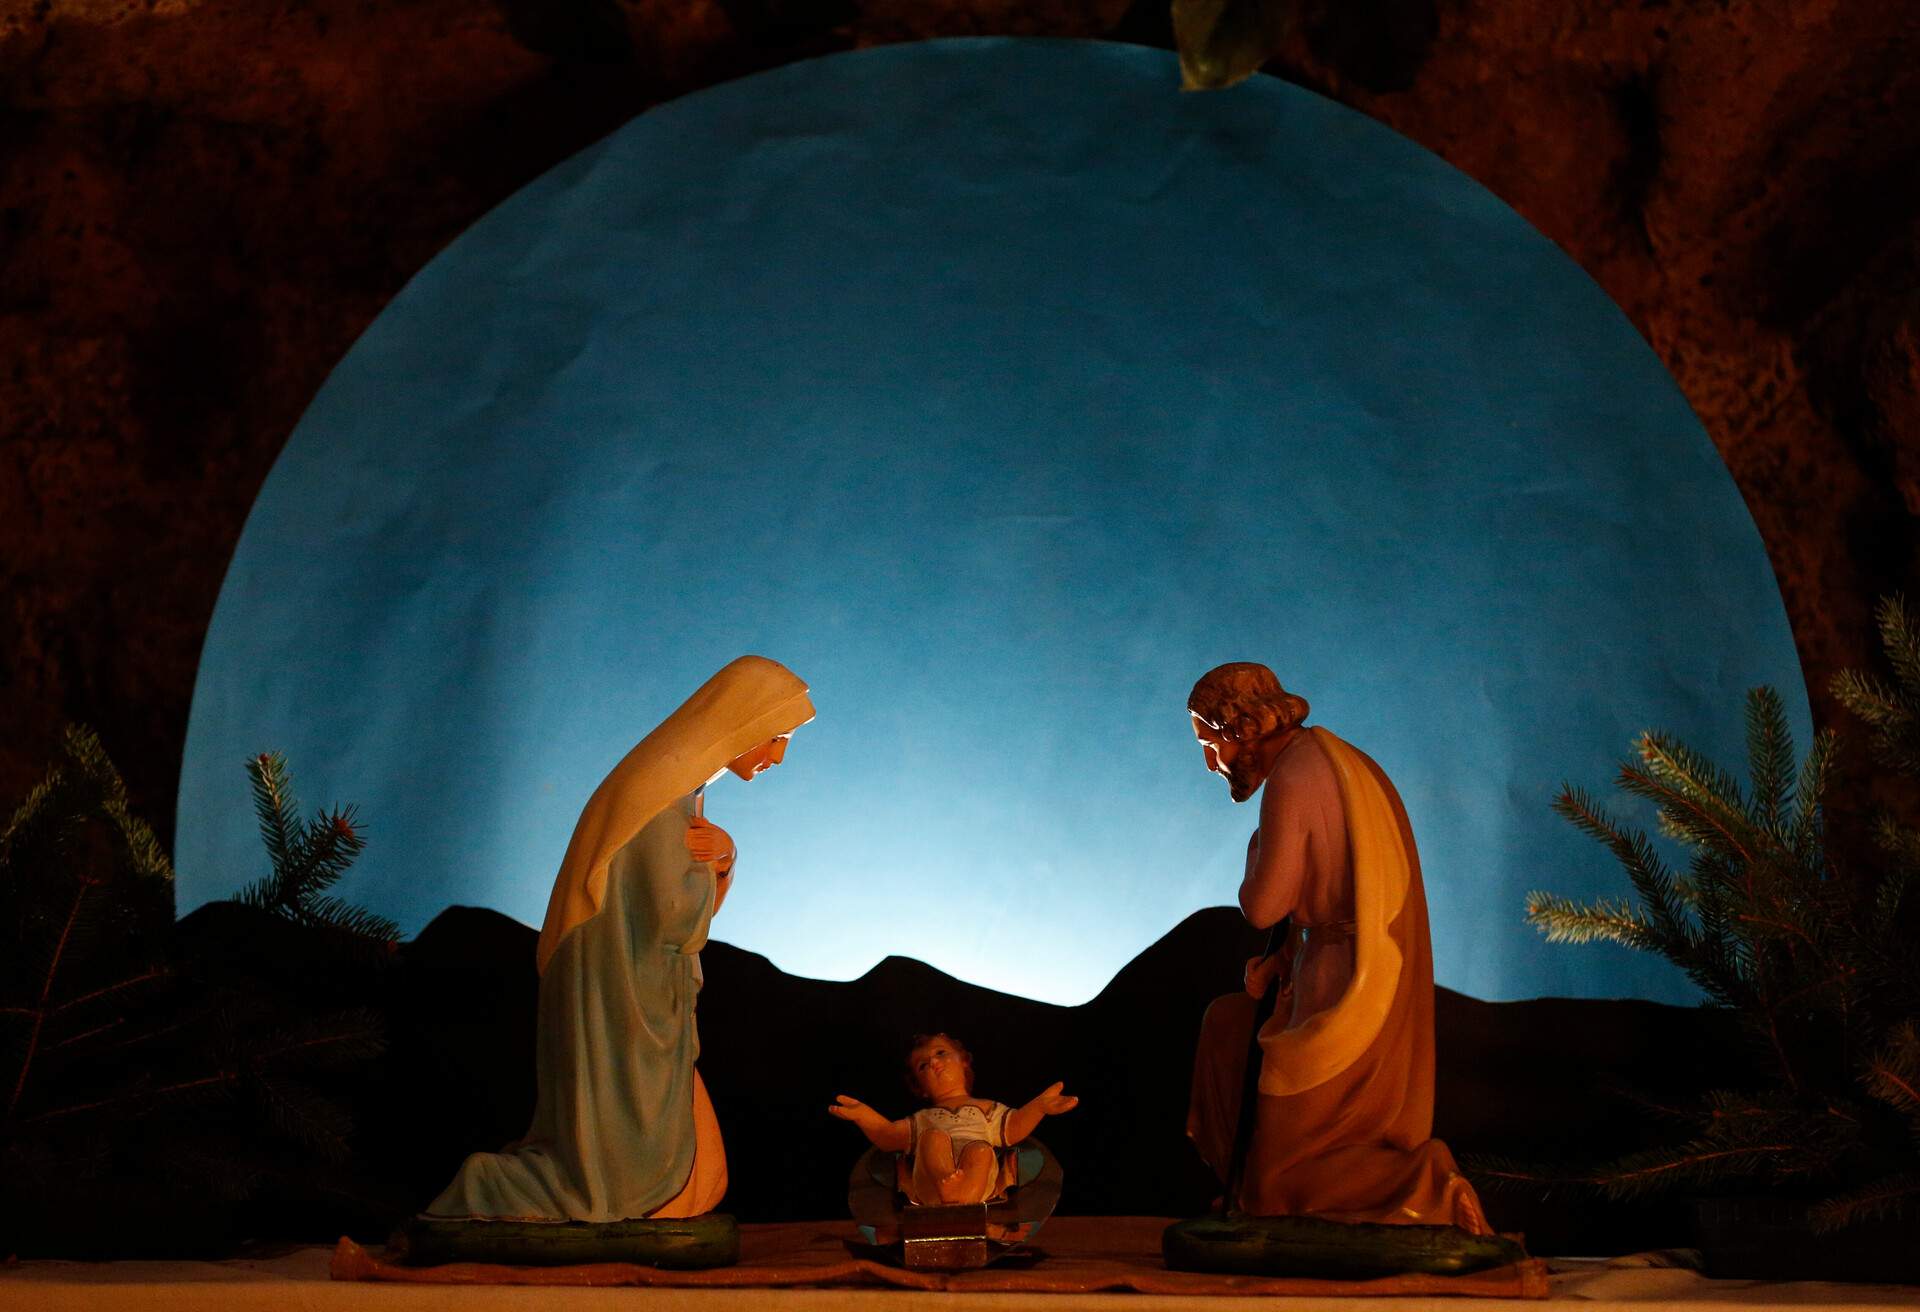 Mary and Joseph kneeling beside the infant Jesus with a moon backdrop.